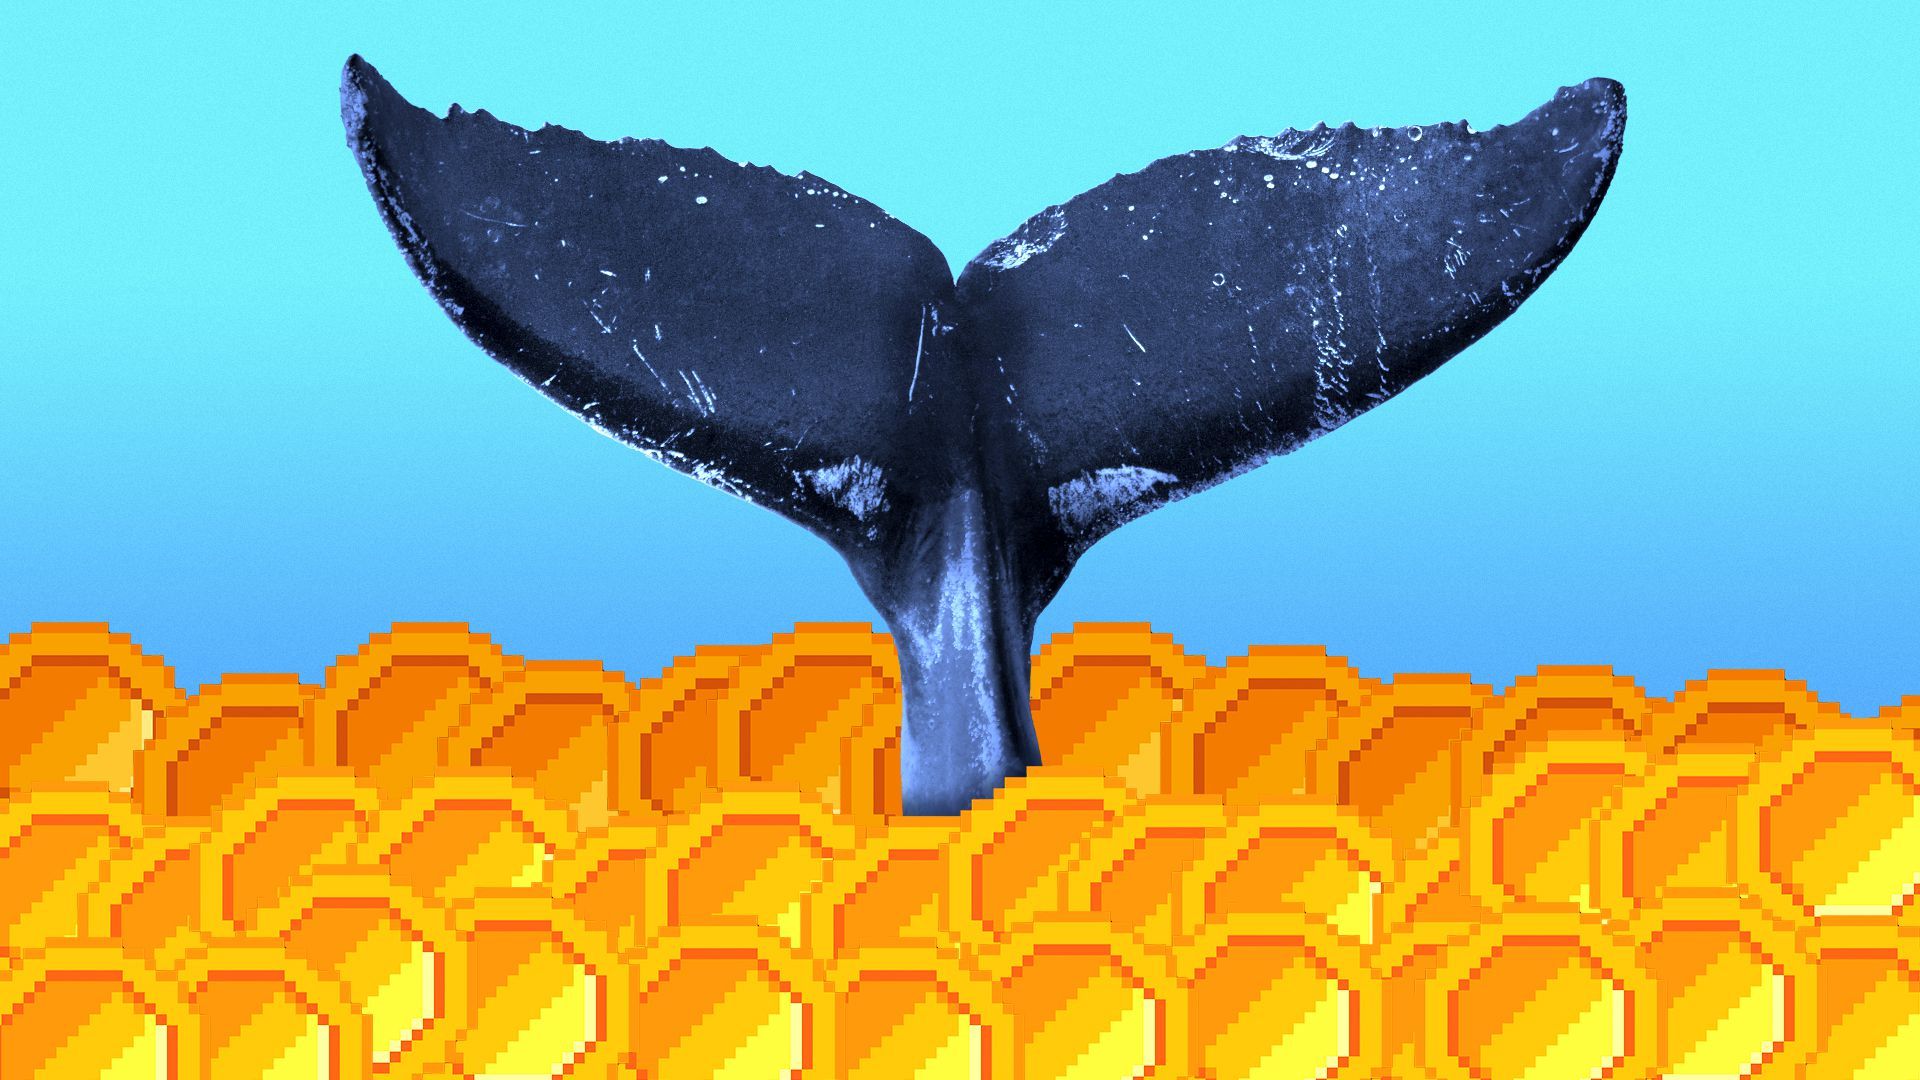 Illustration of a whale’s tail emerging from a sea of pixelated coins.